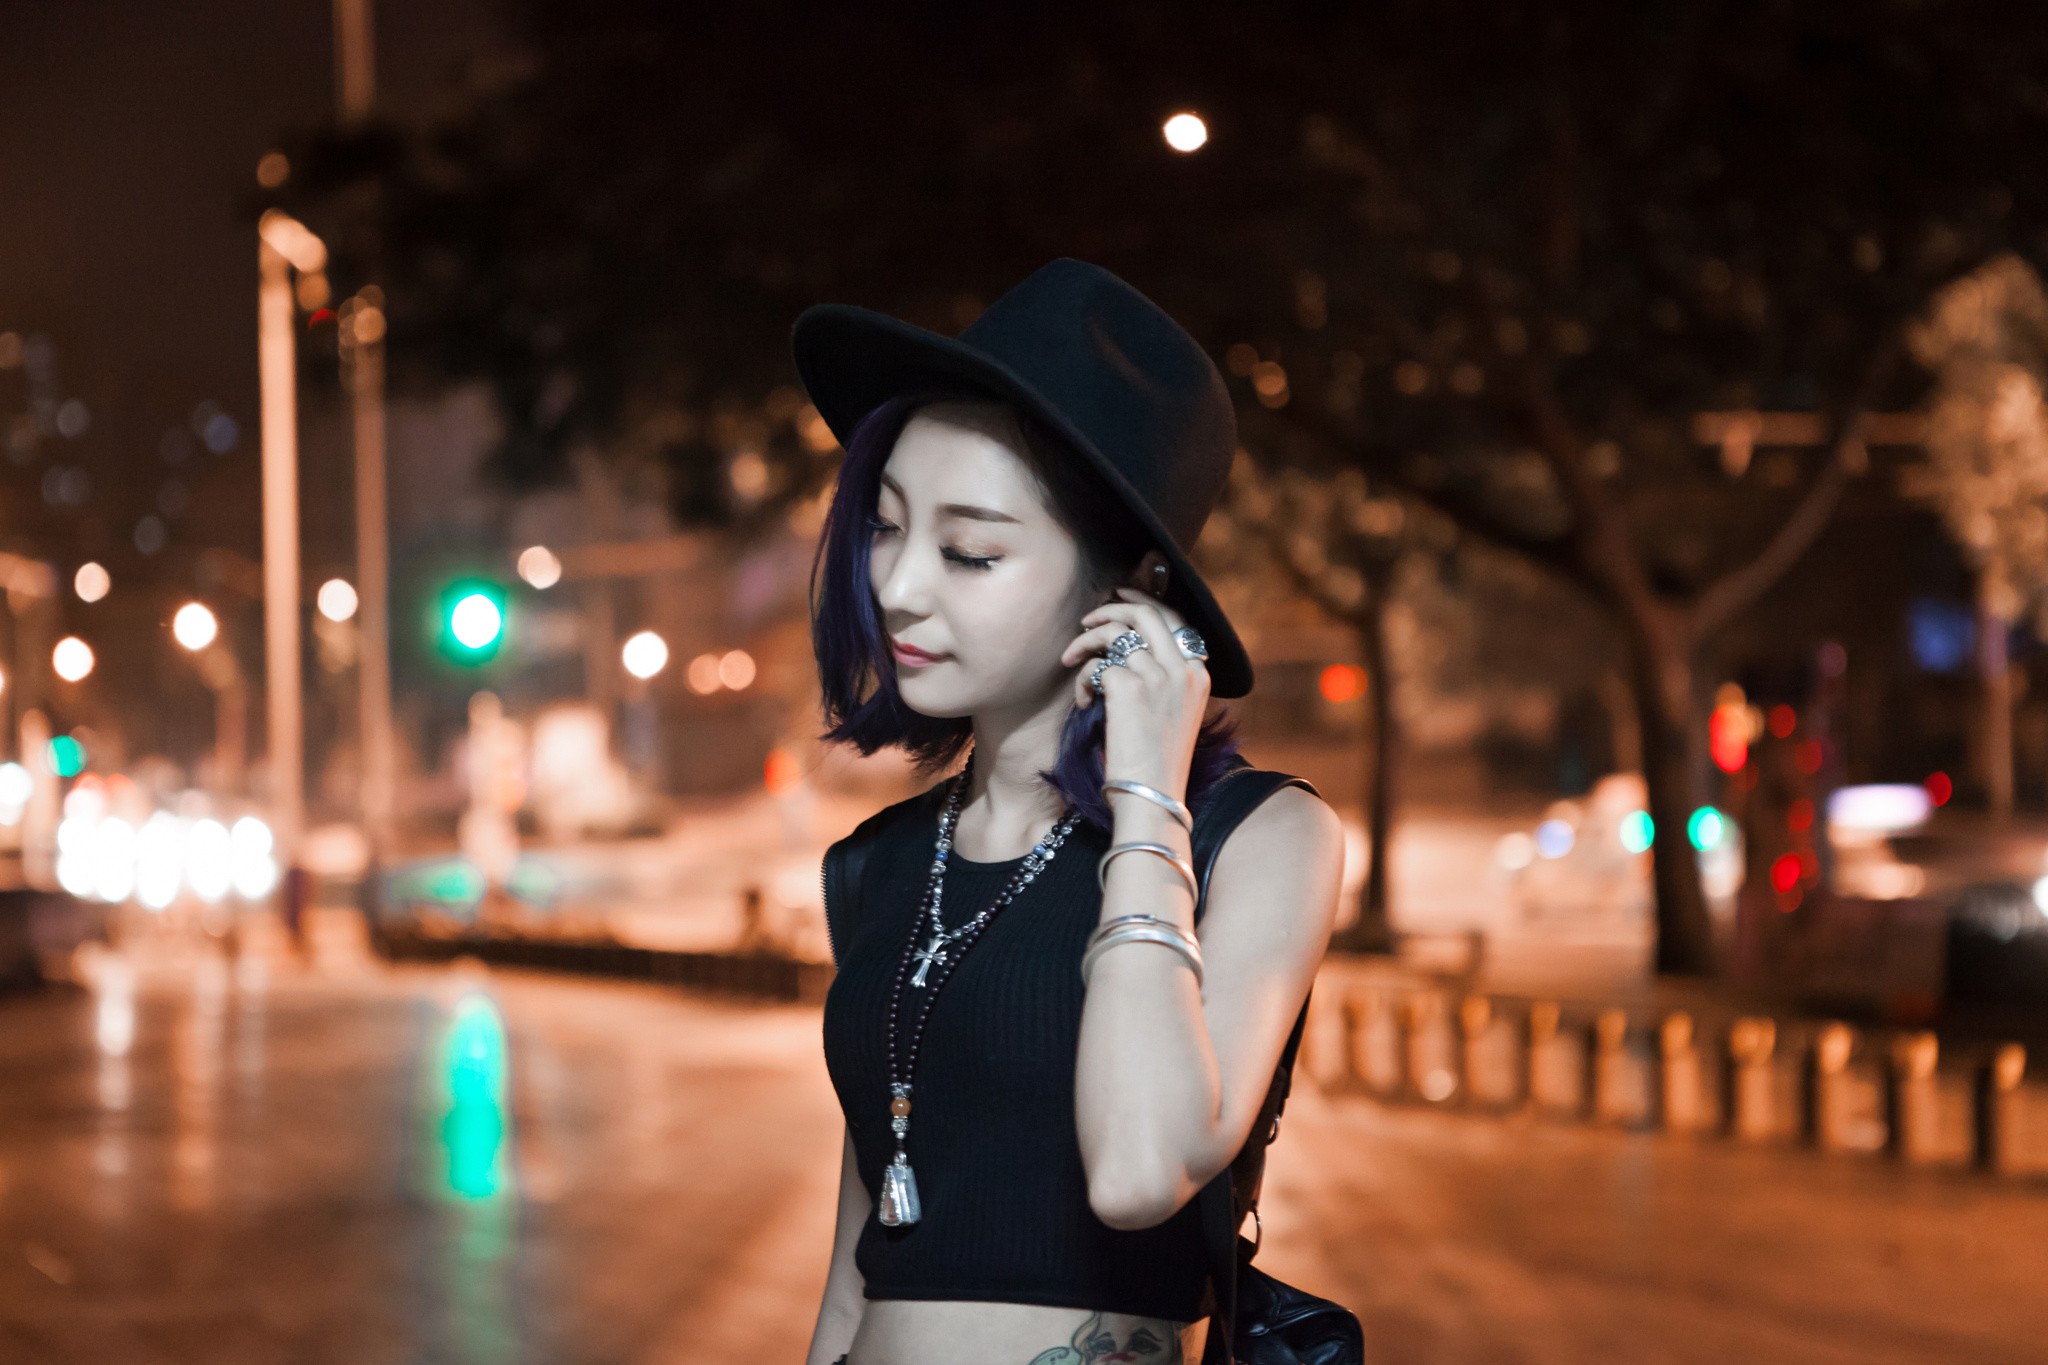 People 2048x1365 women face portrait Asian tattoo hat closed eyes millinery outdoors bracelets necklace dyed hair short hair urban women with hats city lights pale black top makeup inked girls rings women outdoors